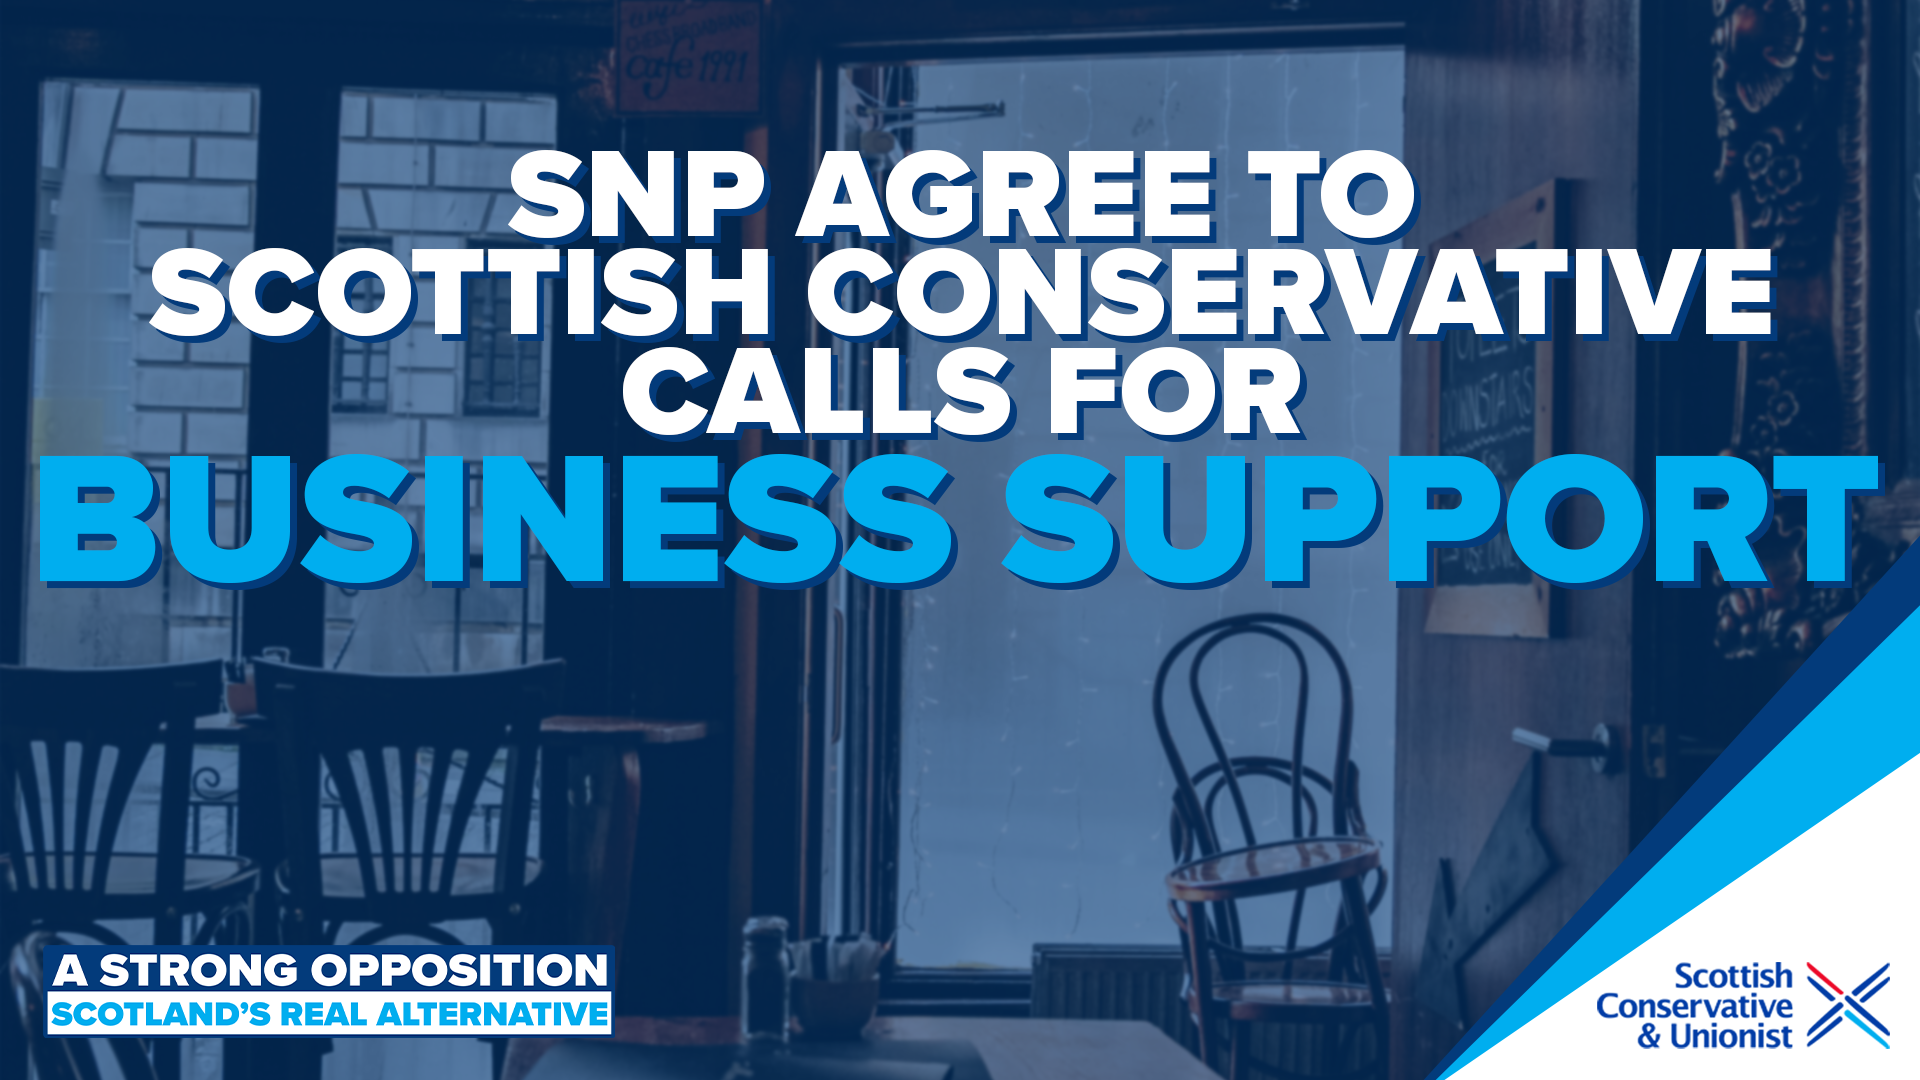 SNP agree to Scottish Conservative calls for business support